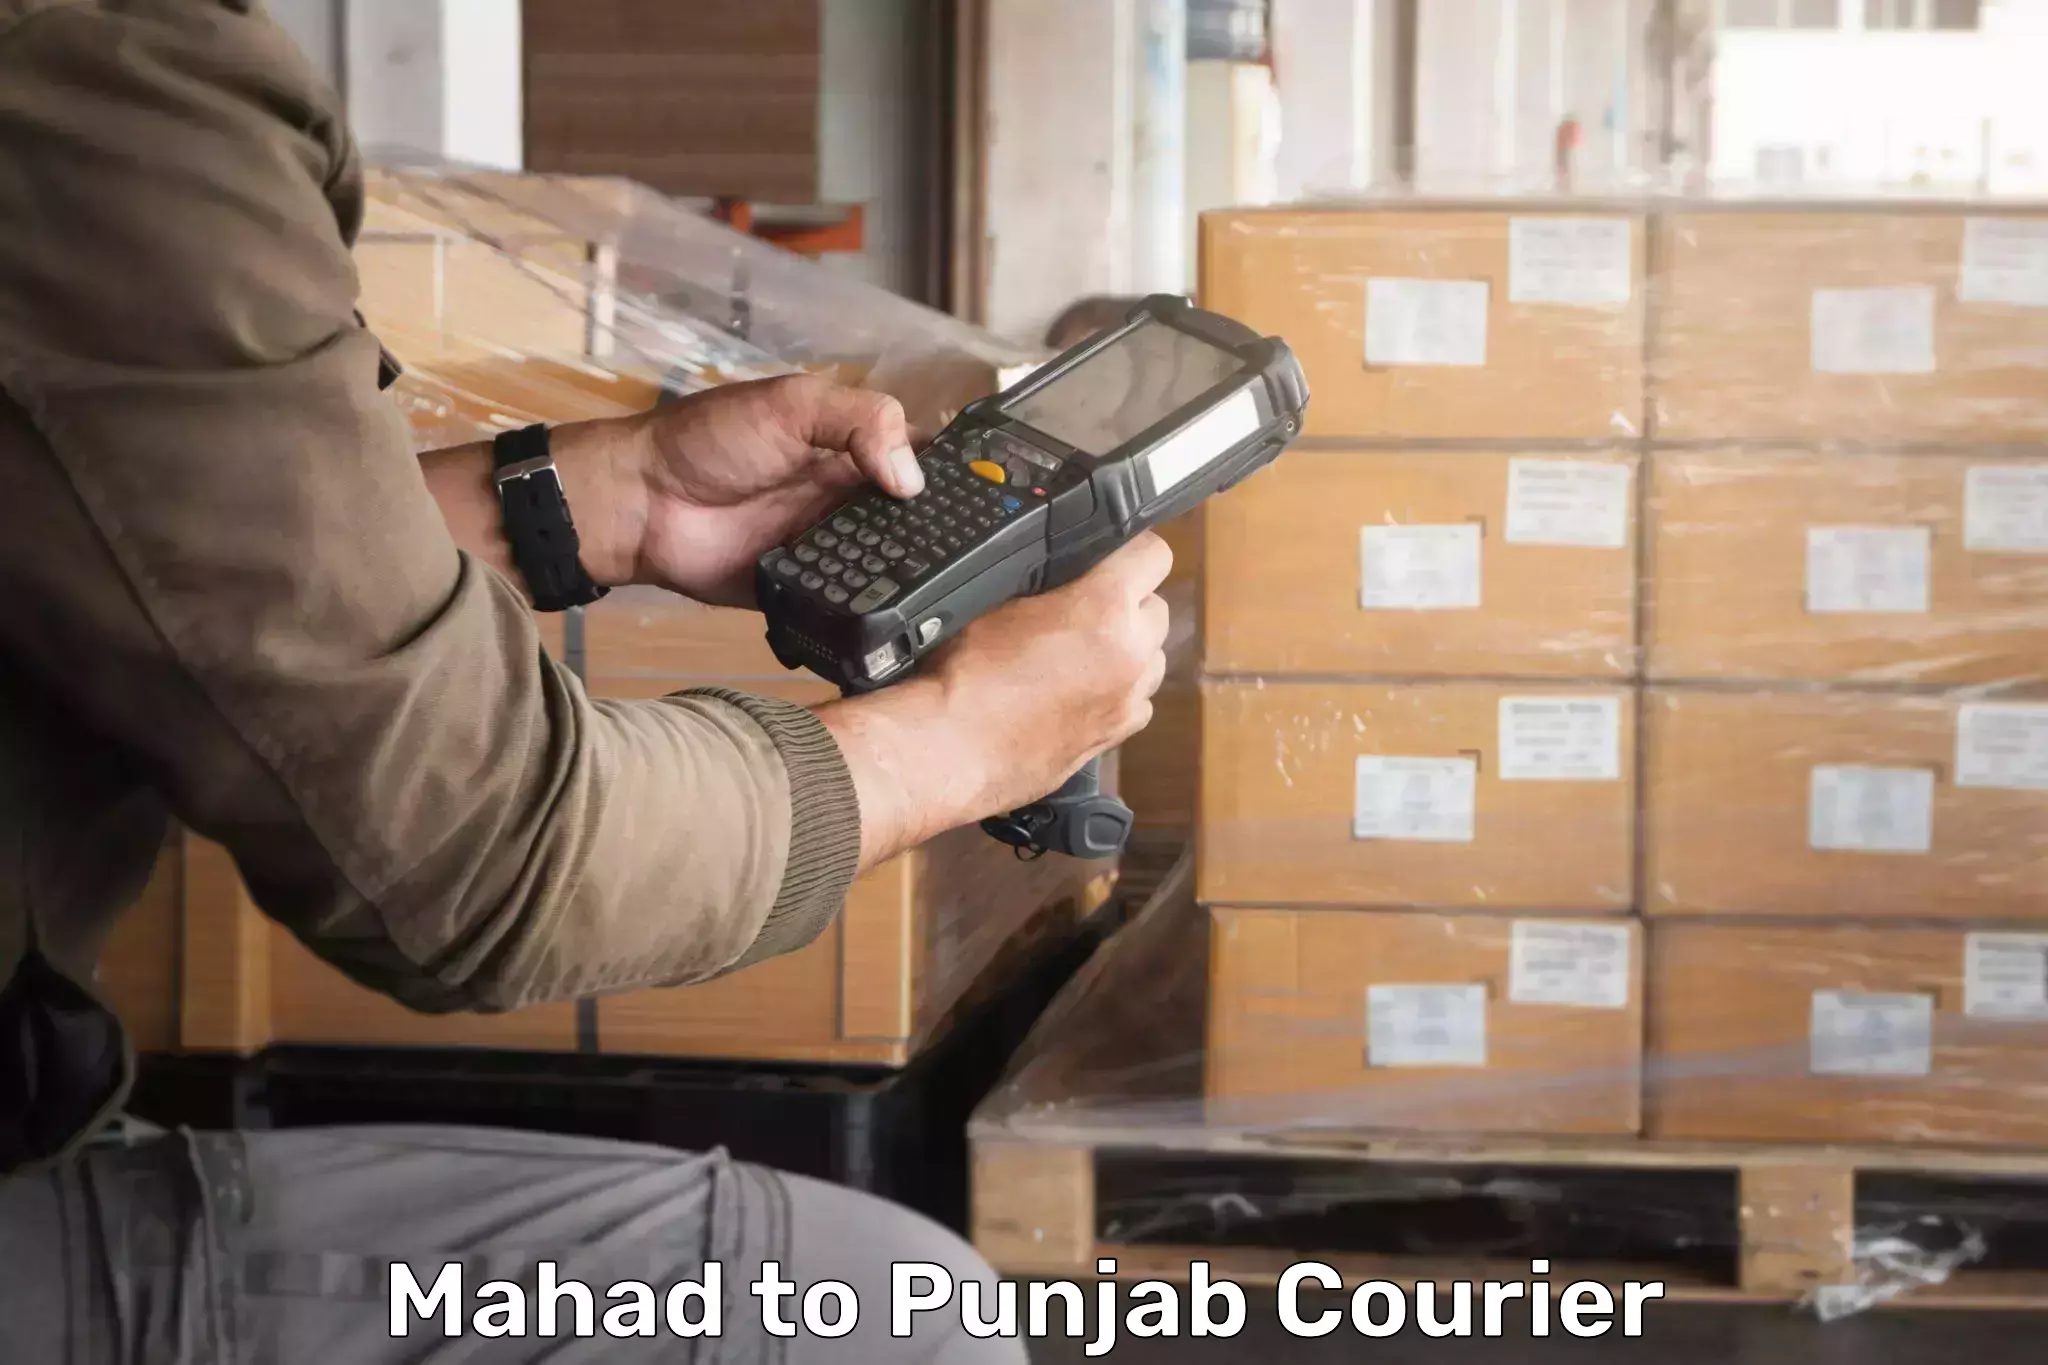 Residential courier service in Mahad to Punjab